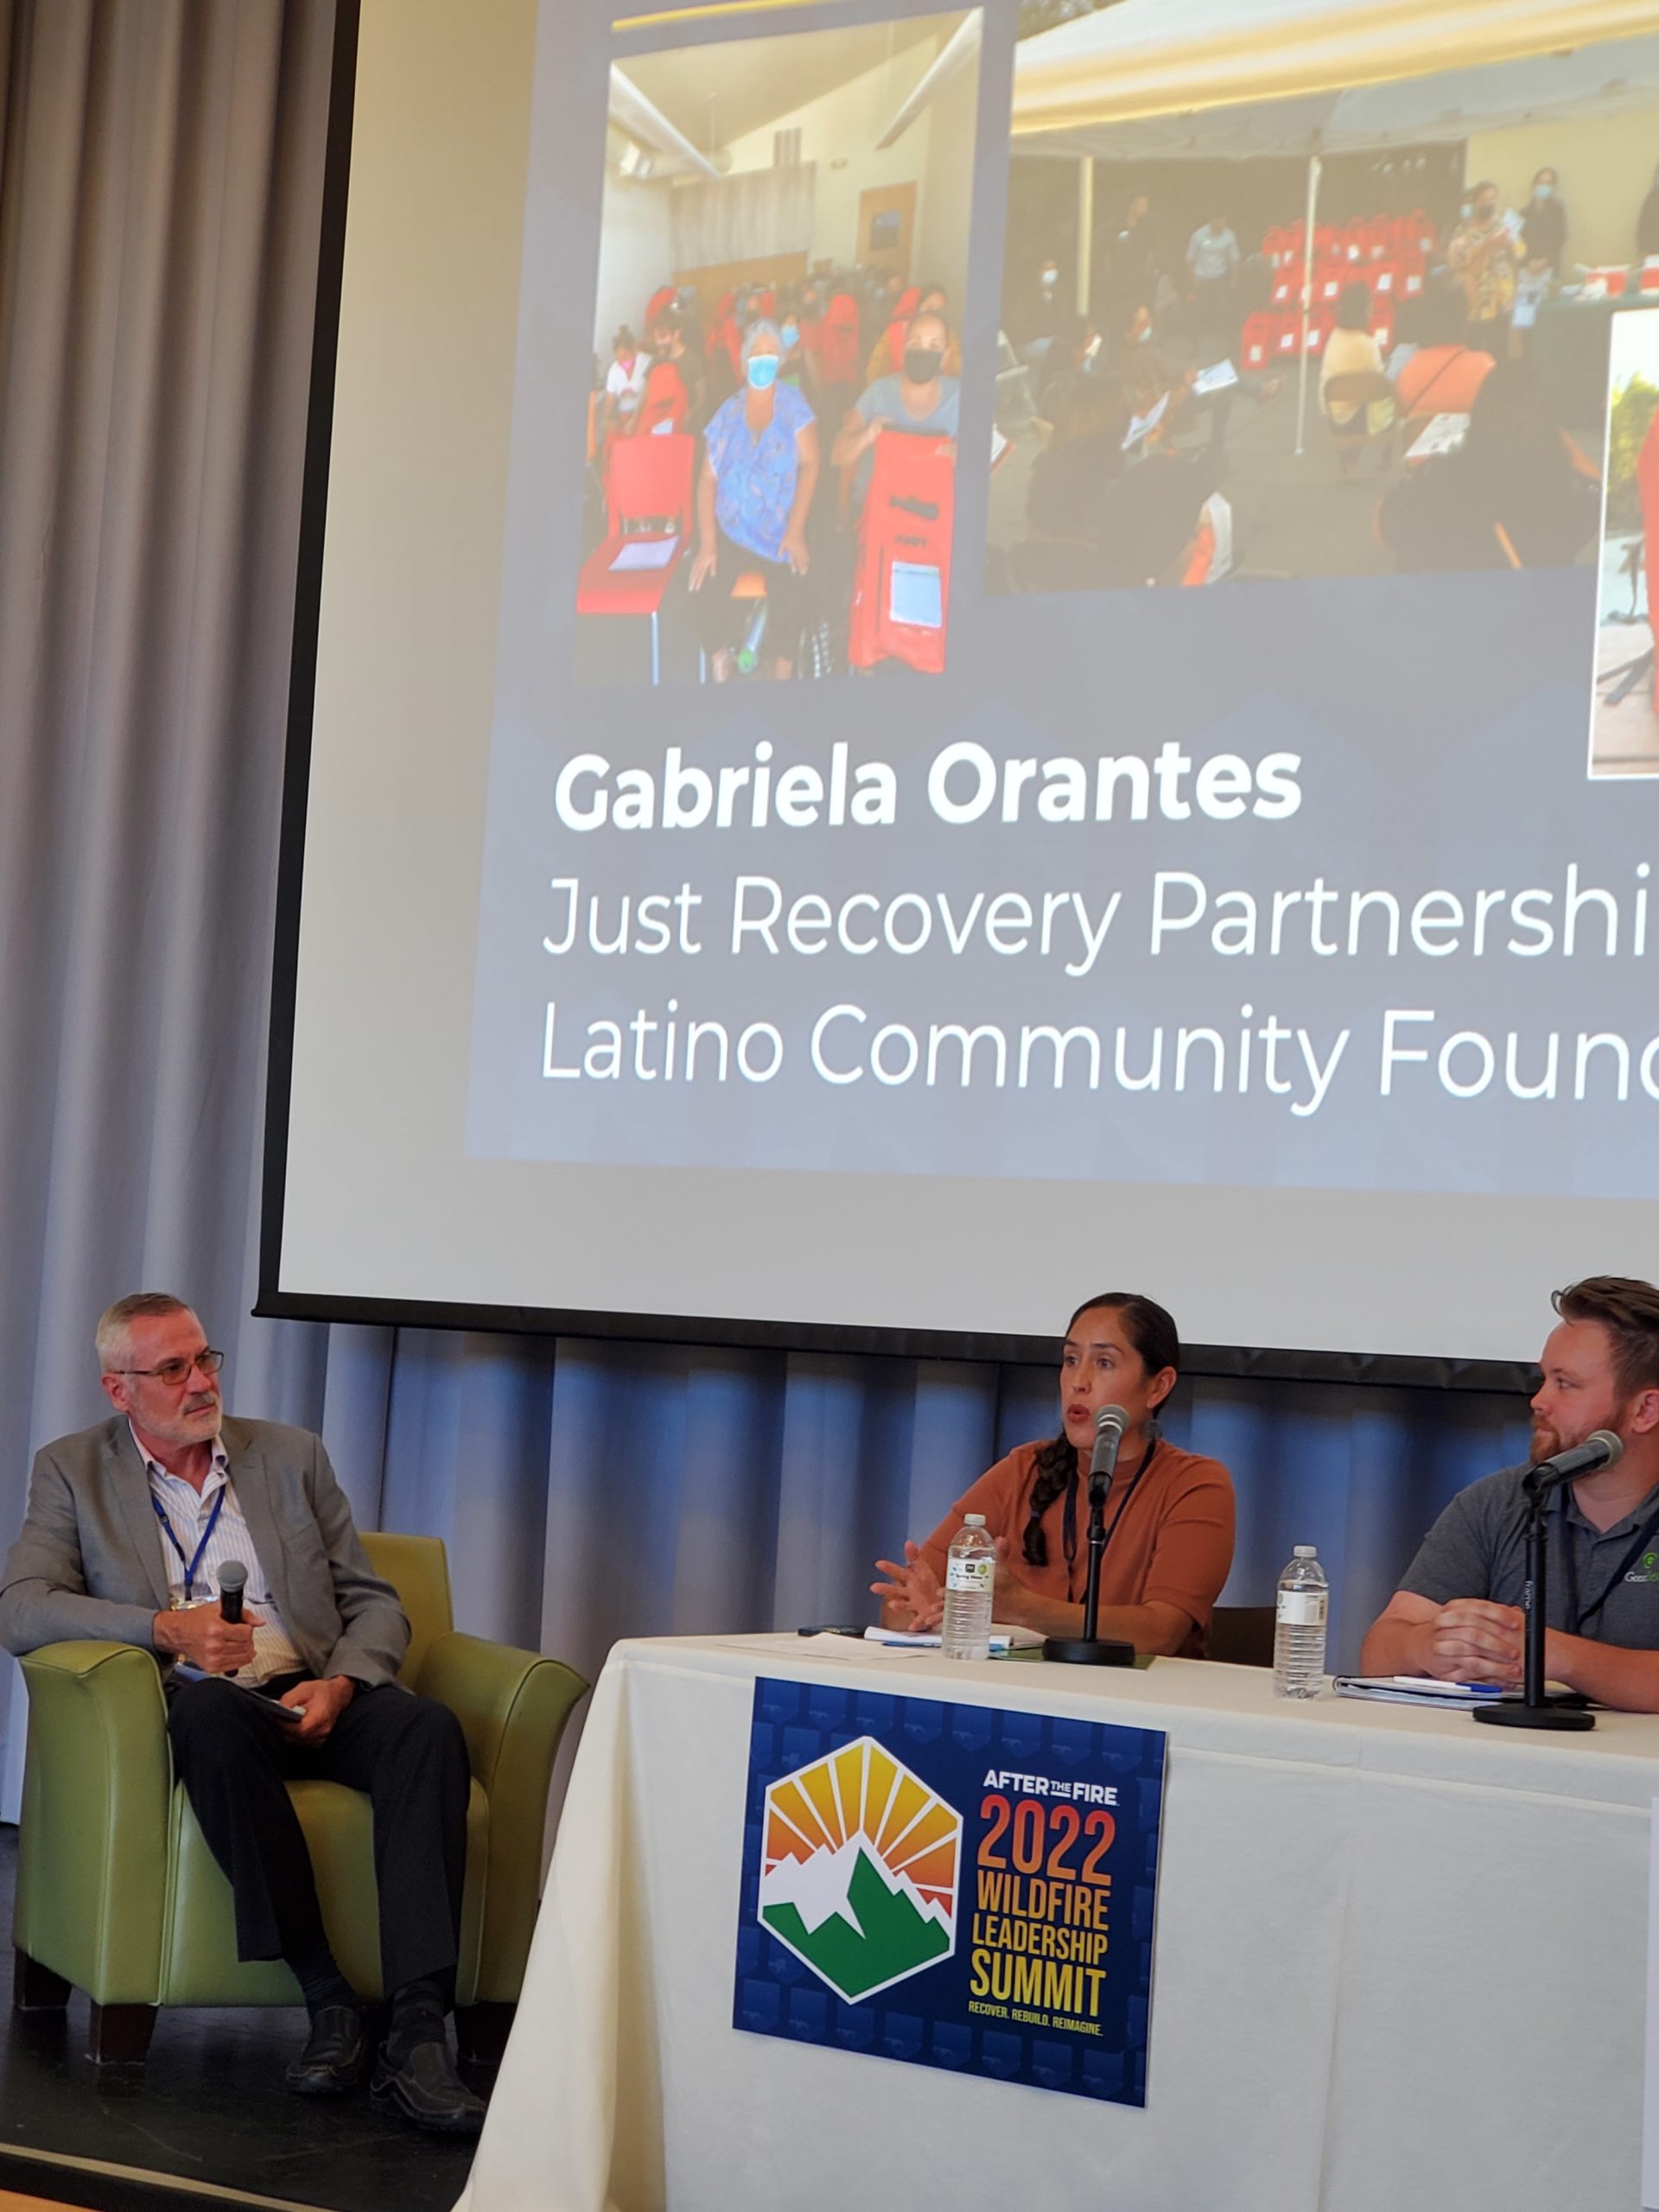 Gabriela Orantes outlined what is required for a Just Recovery, as detailed in the Latino Community Foundations recent report by that name